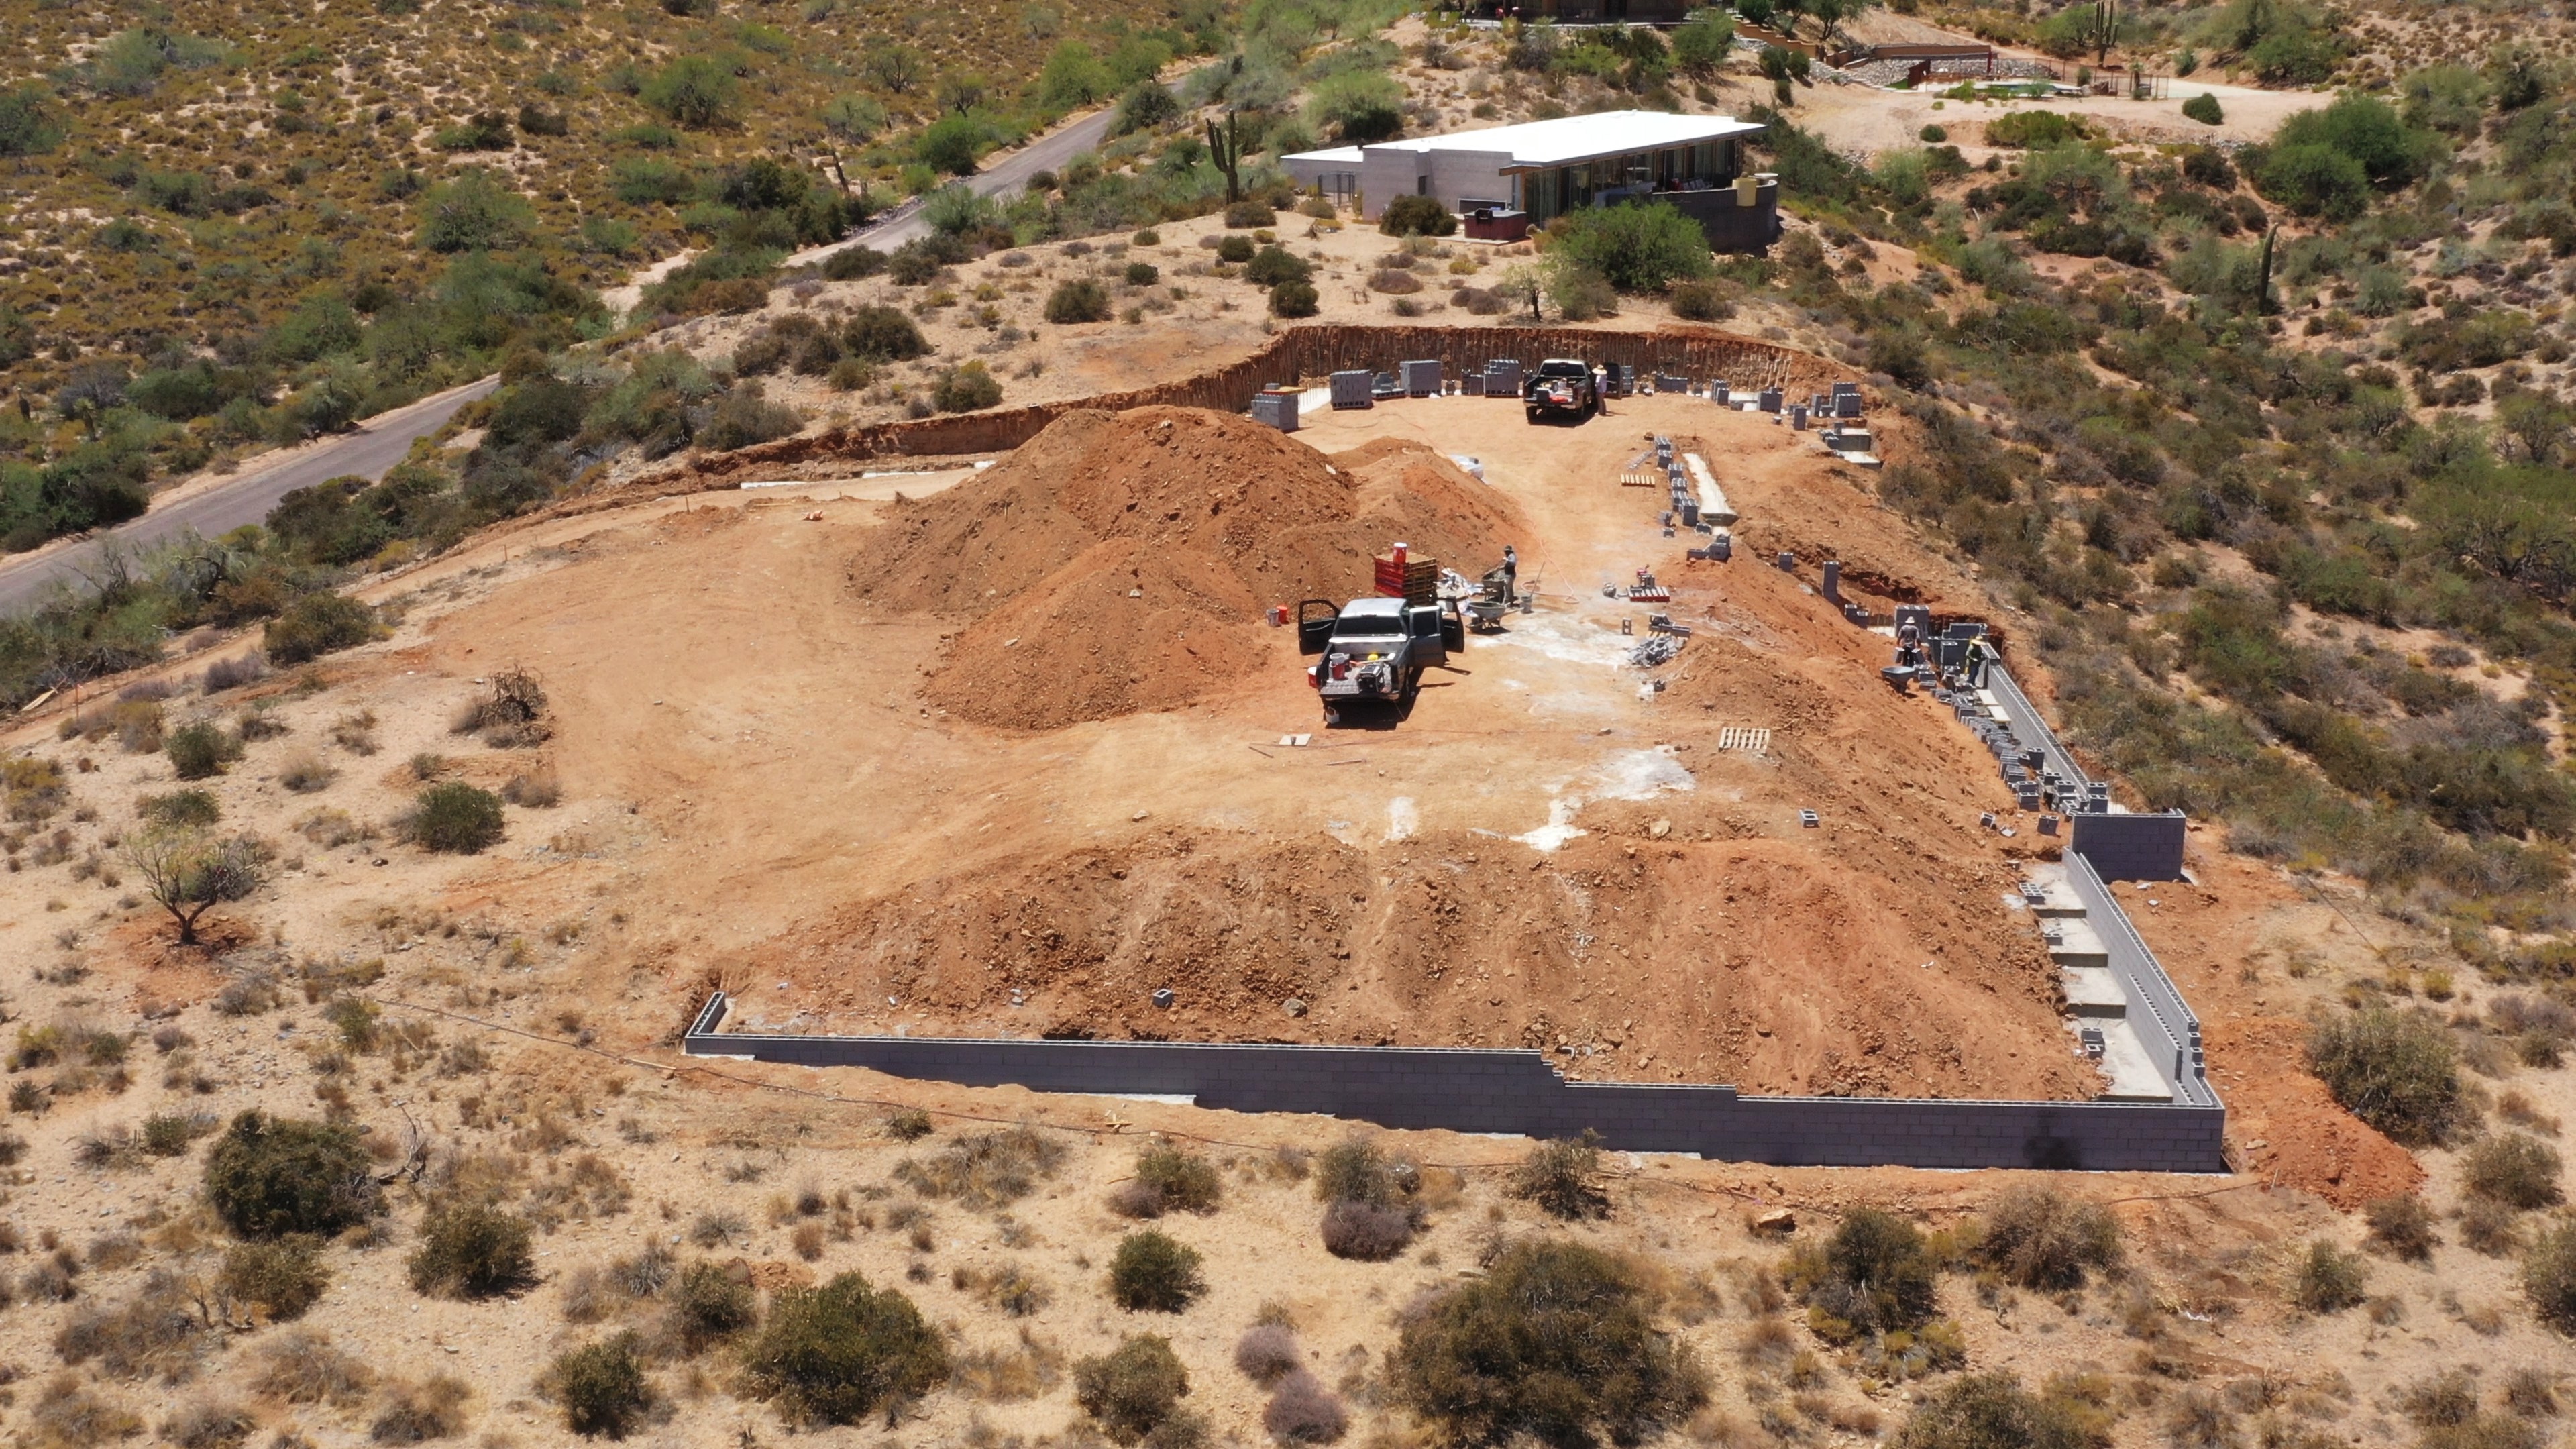 After enduring a 32-week permitting process, the Desert Comfort project team set out to excavate the site, mindful of environmentally sensitive soils, plants, and watersheds.